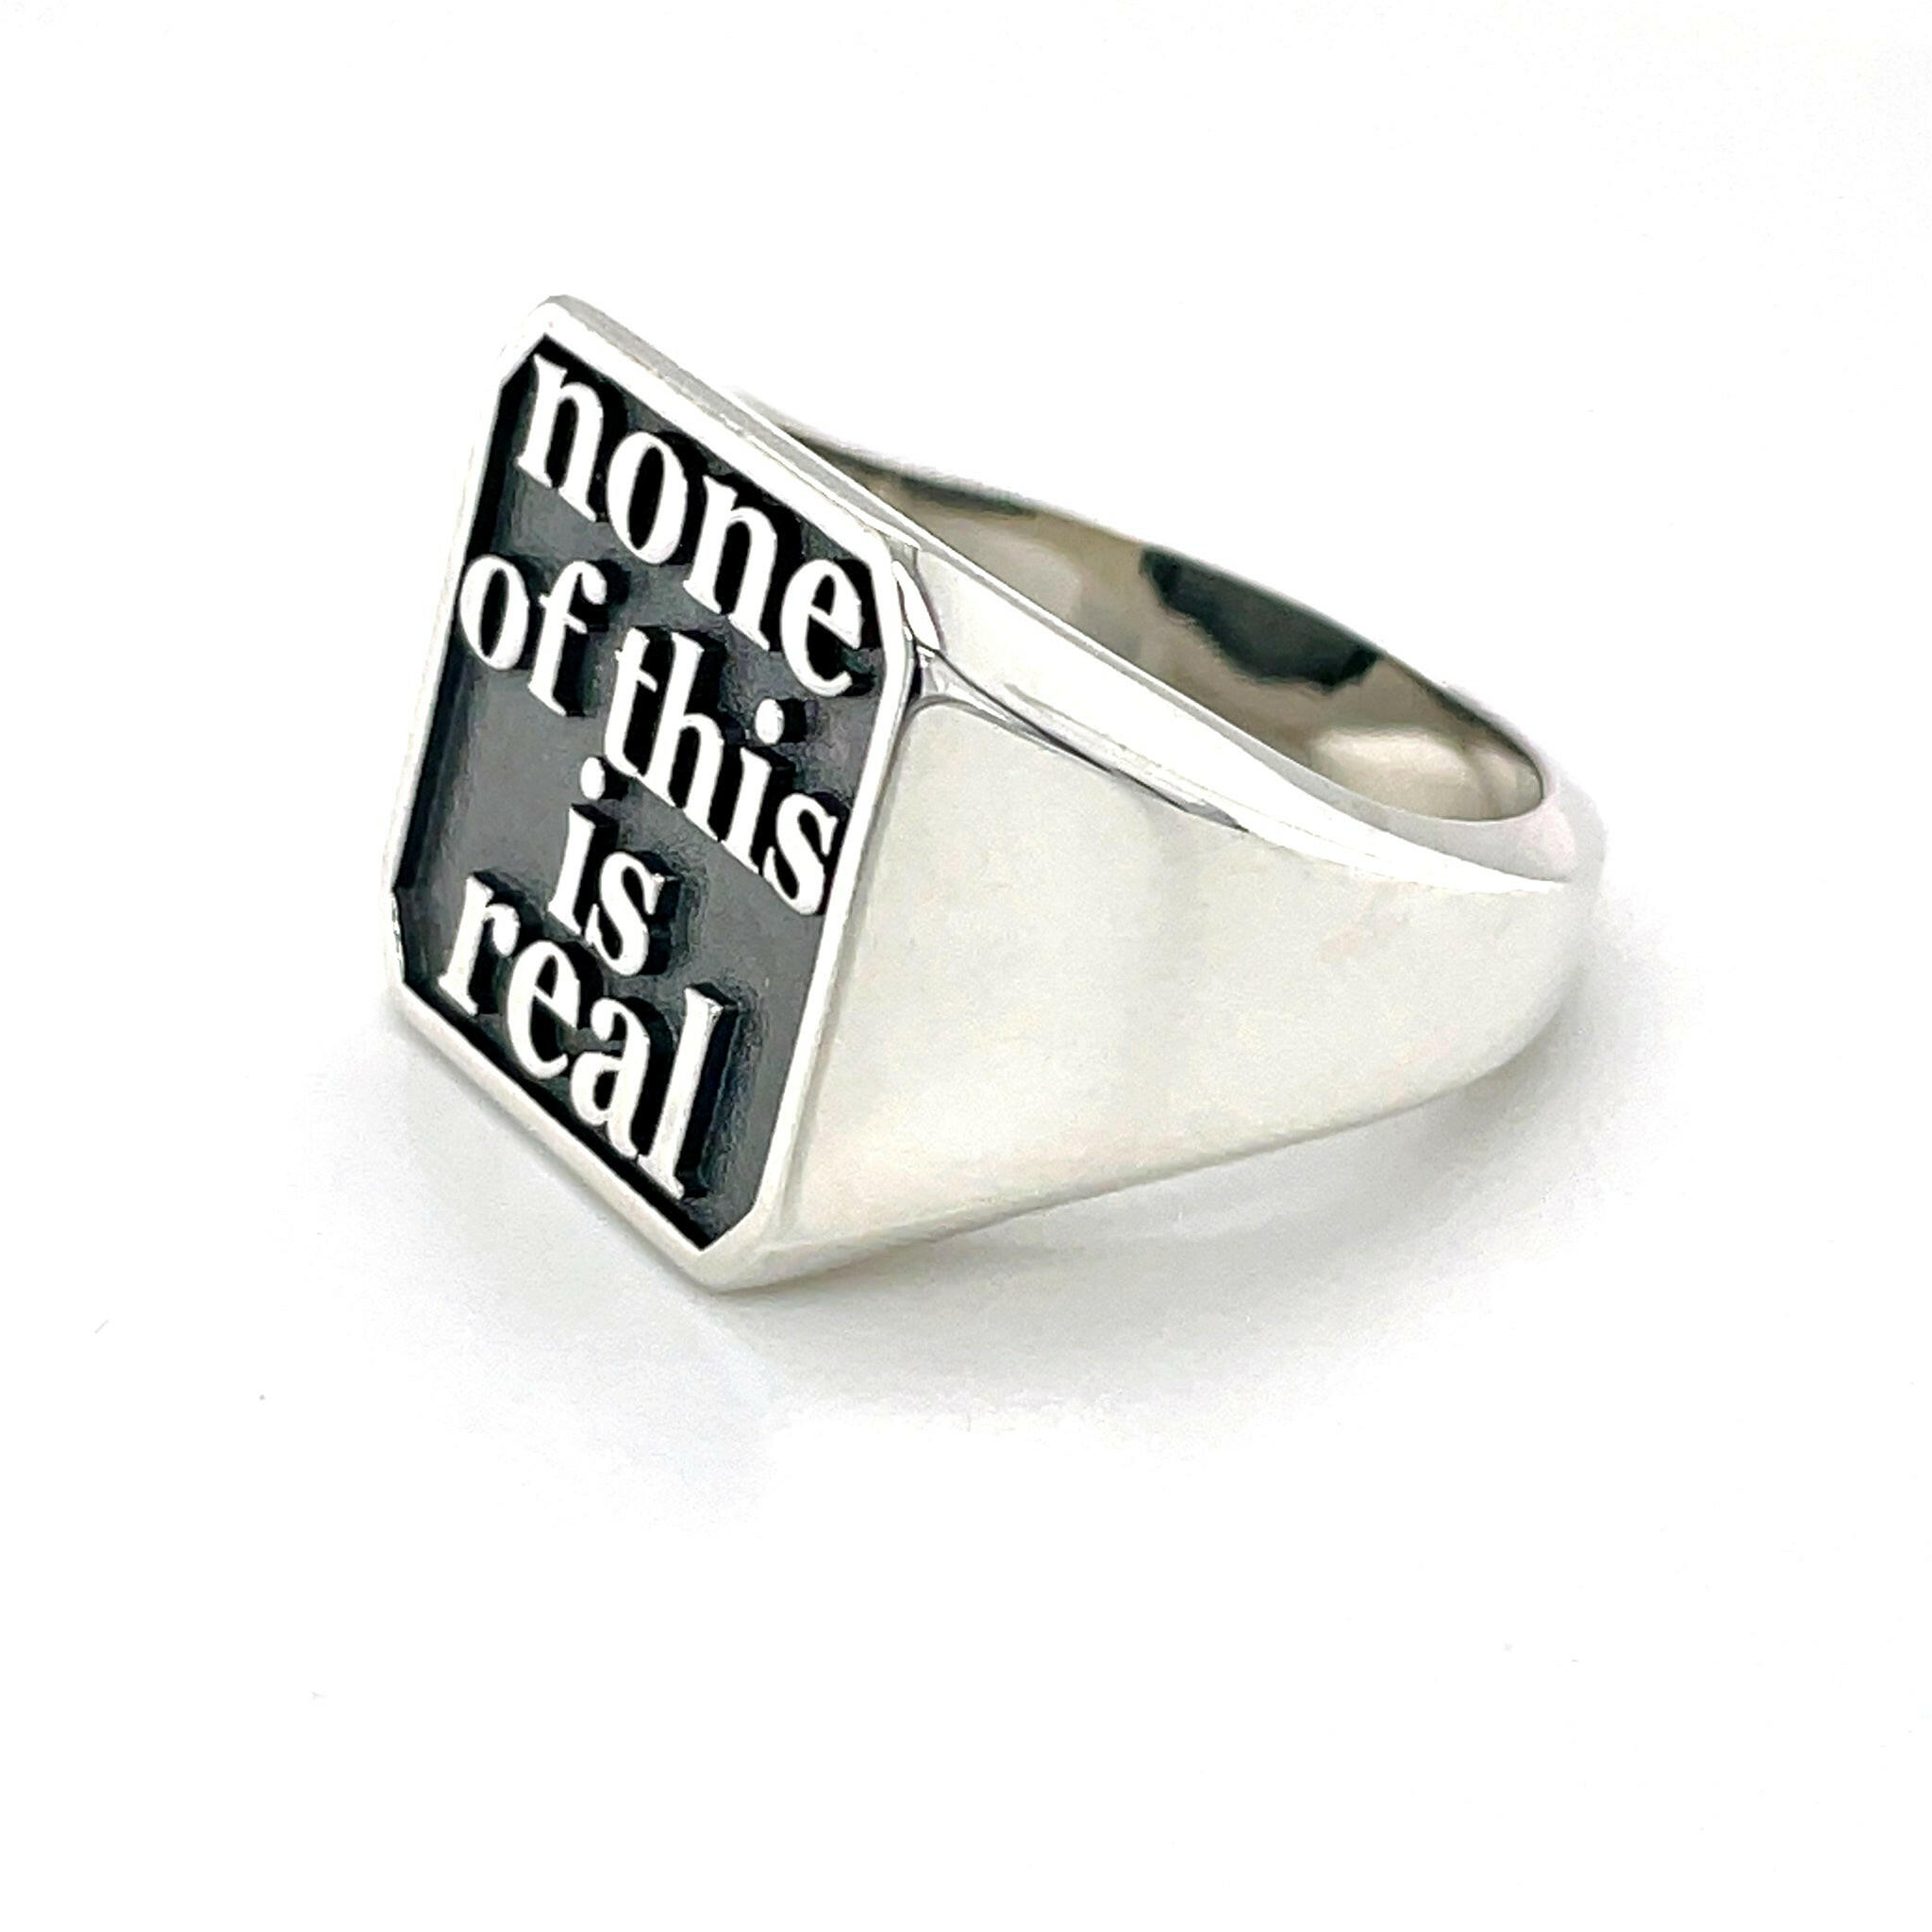 None of This is Real (Salty) - Ilah Cibis Jewelry-Rings